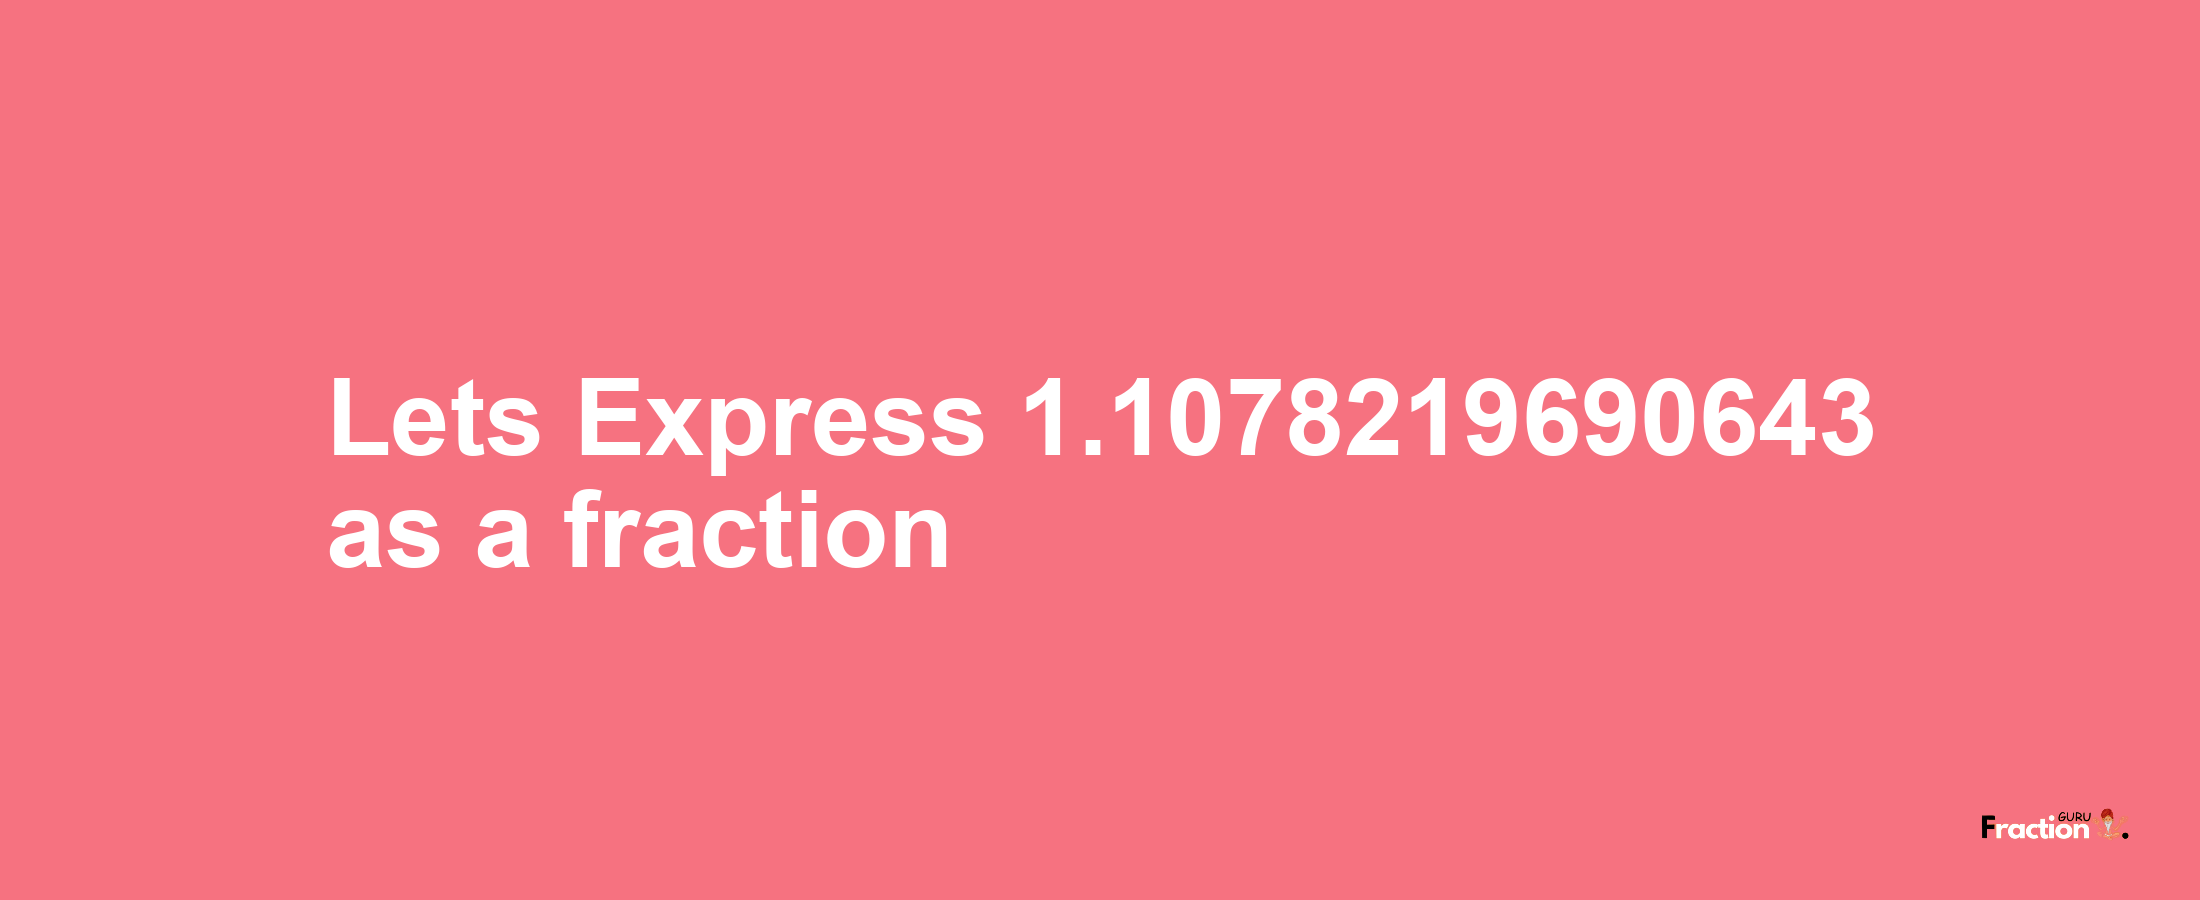 Lets Express 1.1078219690643 as afraction